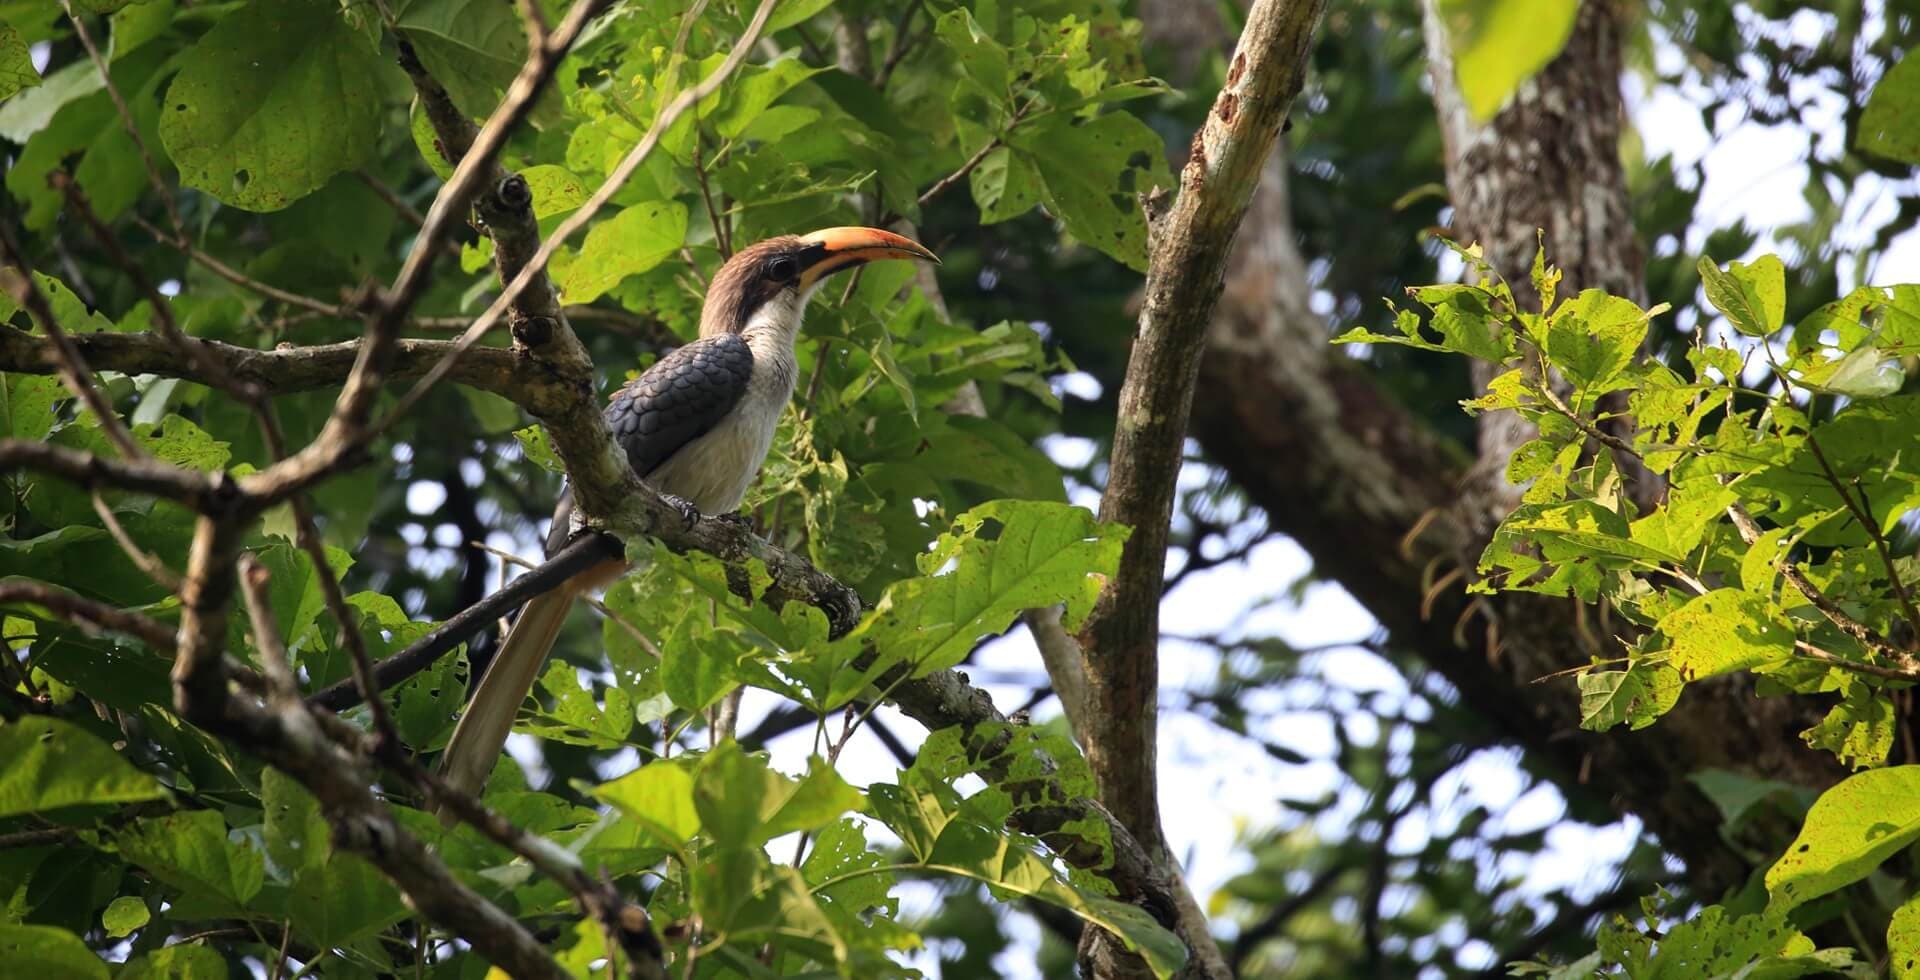 The Sri Lanka grey hornbill (Ocyceros gingalensis) is a bird in the hornbill family and a widespread and common endemic resident breeder in Sri Lanka